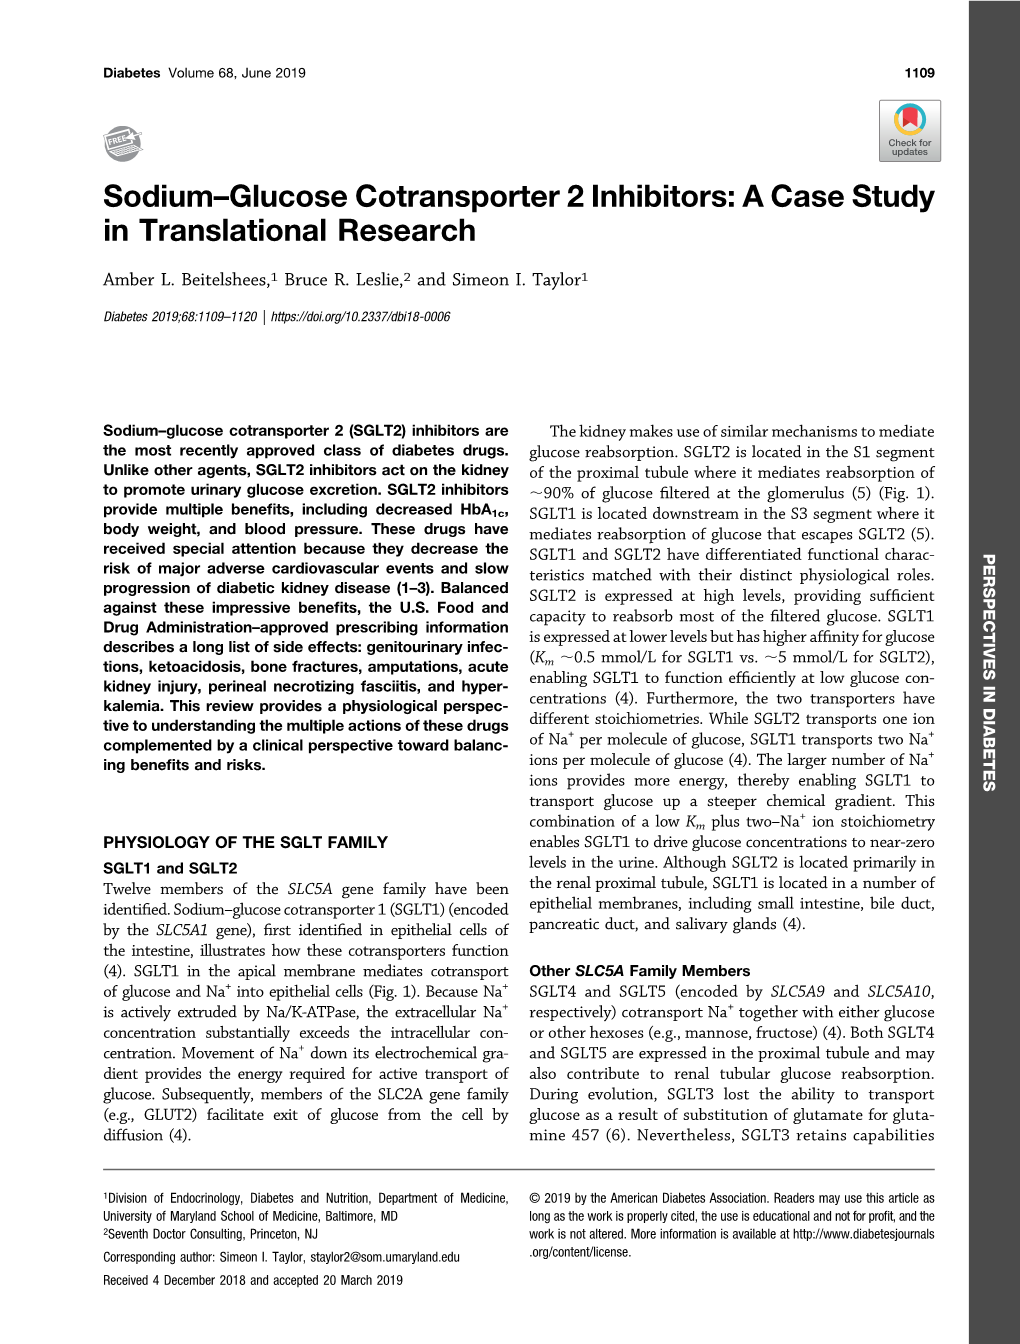 Sodium–Glucose Cotransporter 2 Inhibitors: a Case Study in Translational Research